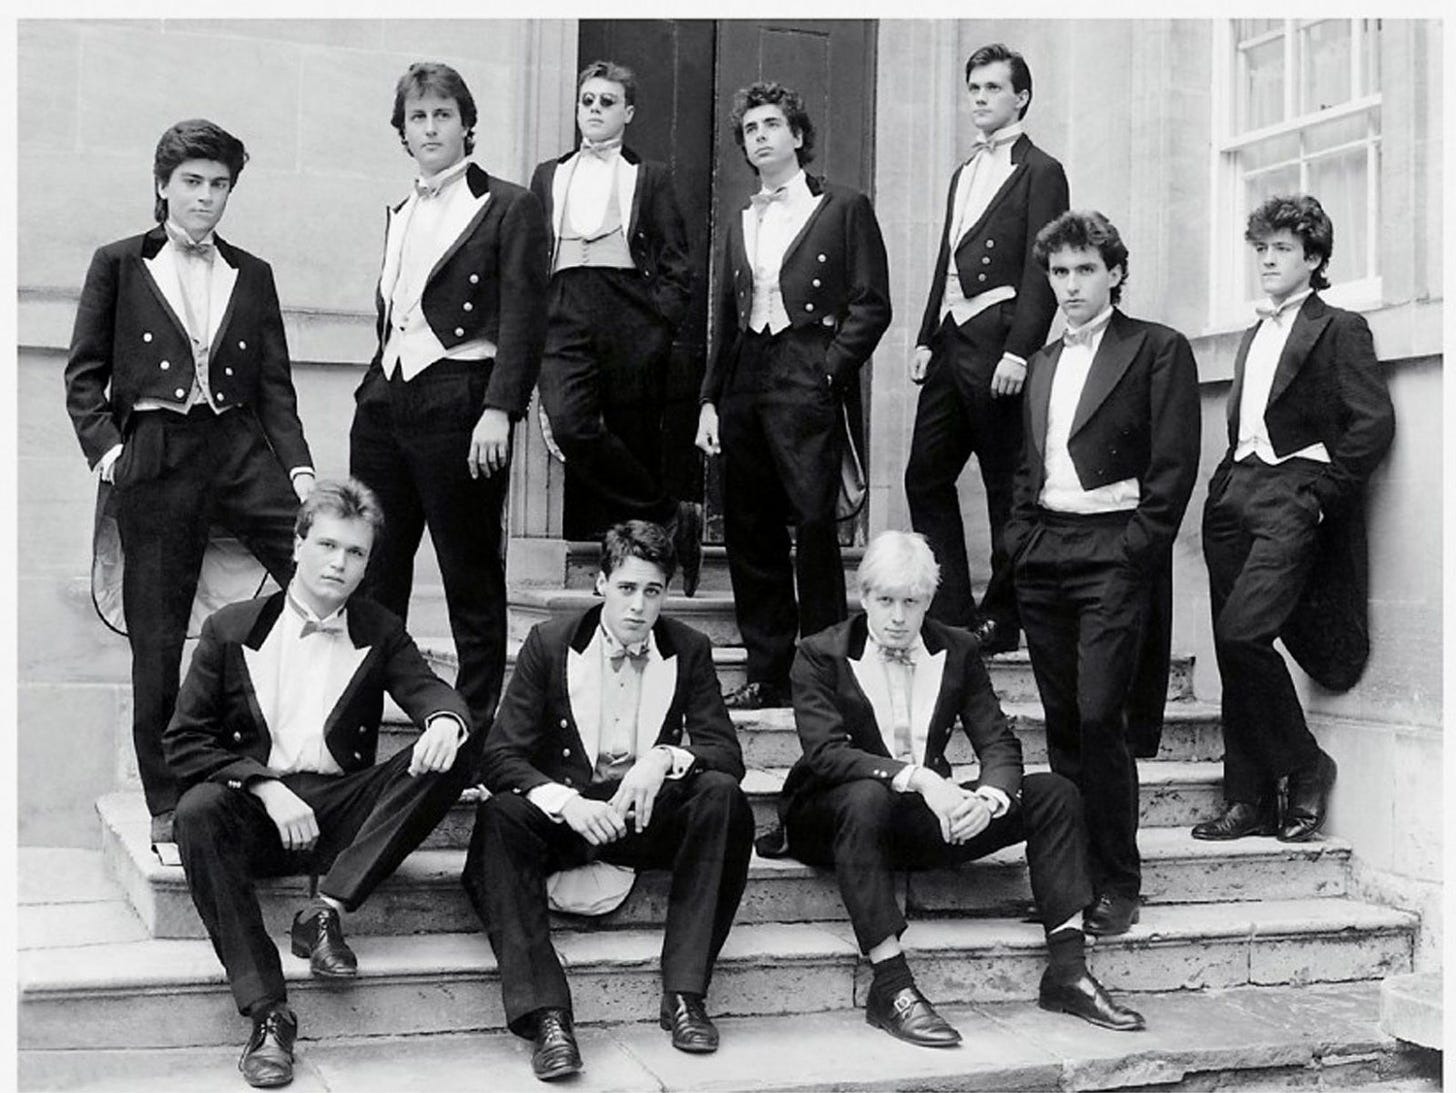 Mid 1980s black and white photo of Oxford University's Bullingdon Club, 10 white men in white tie suits pose poshly on a staircase in front of some double doors.